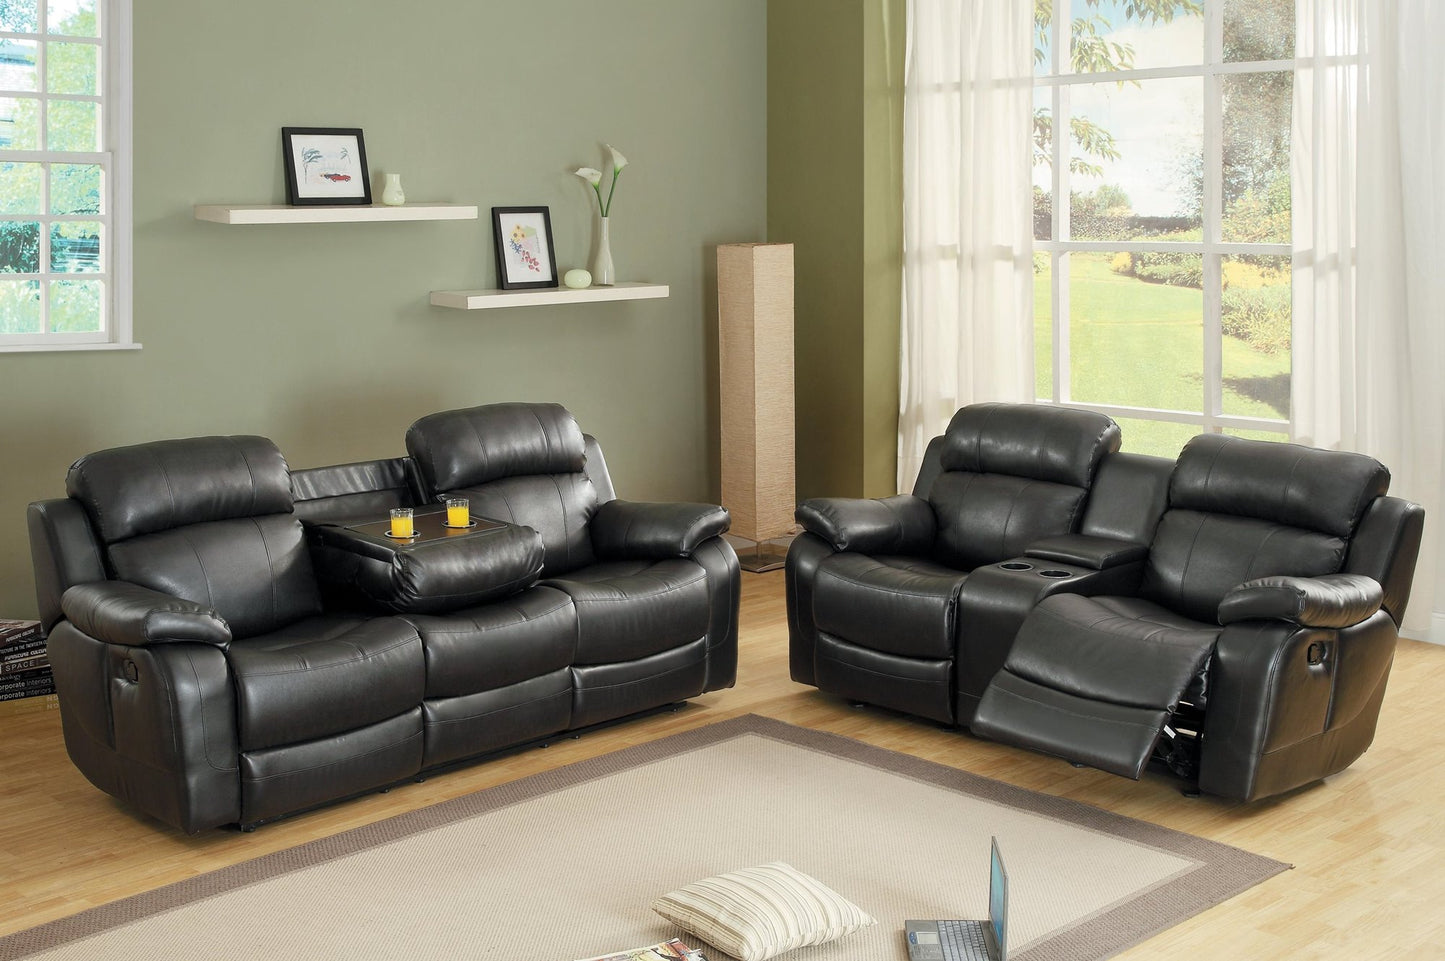 Homelegance MarilleDouble Glider Reclining Love Seat with Console in Leather - Black